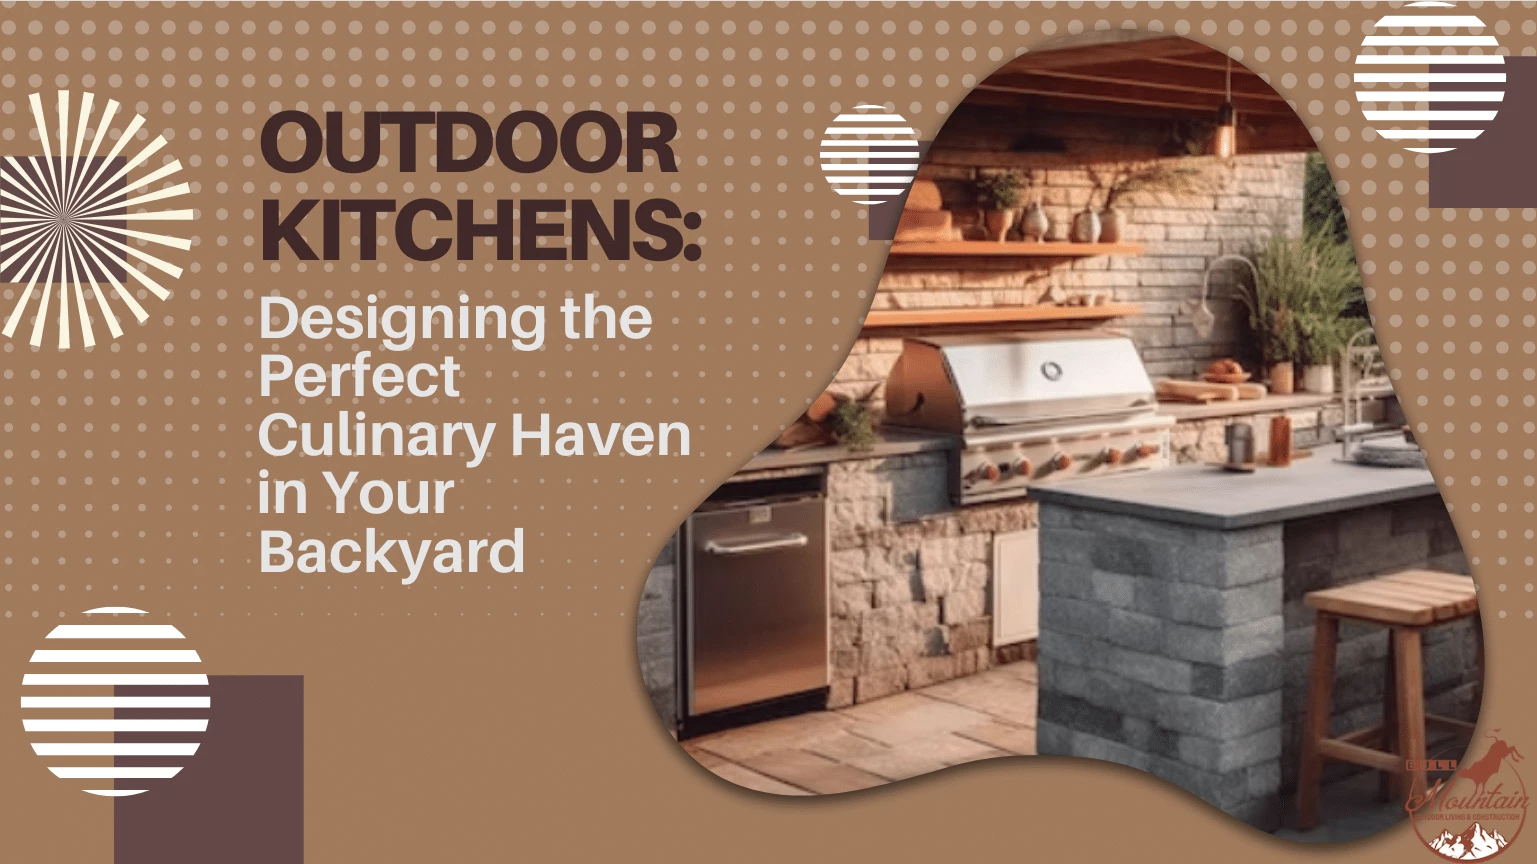 Outdoor Kitchens Designing the Perfect Culinary Haven in Your Backyard